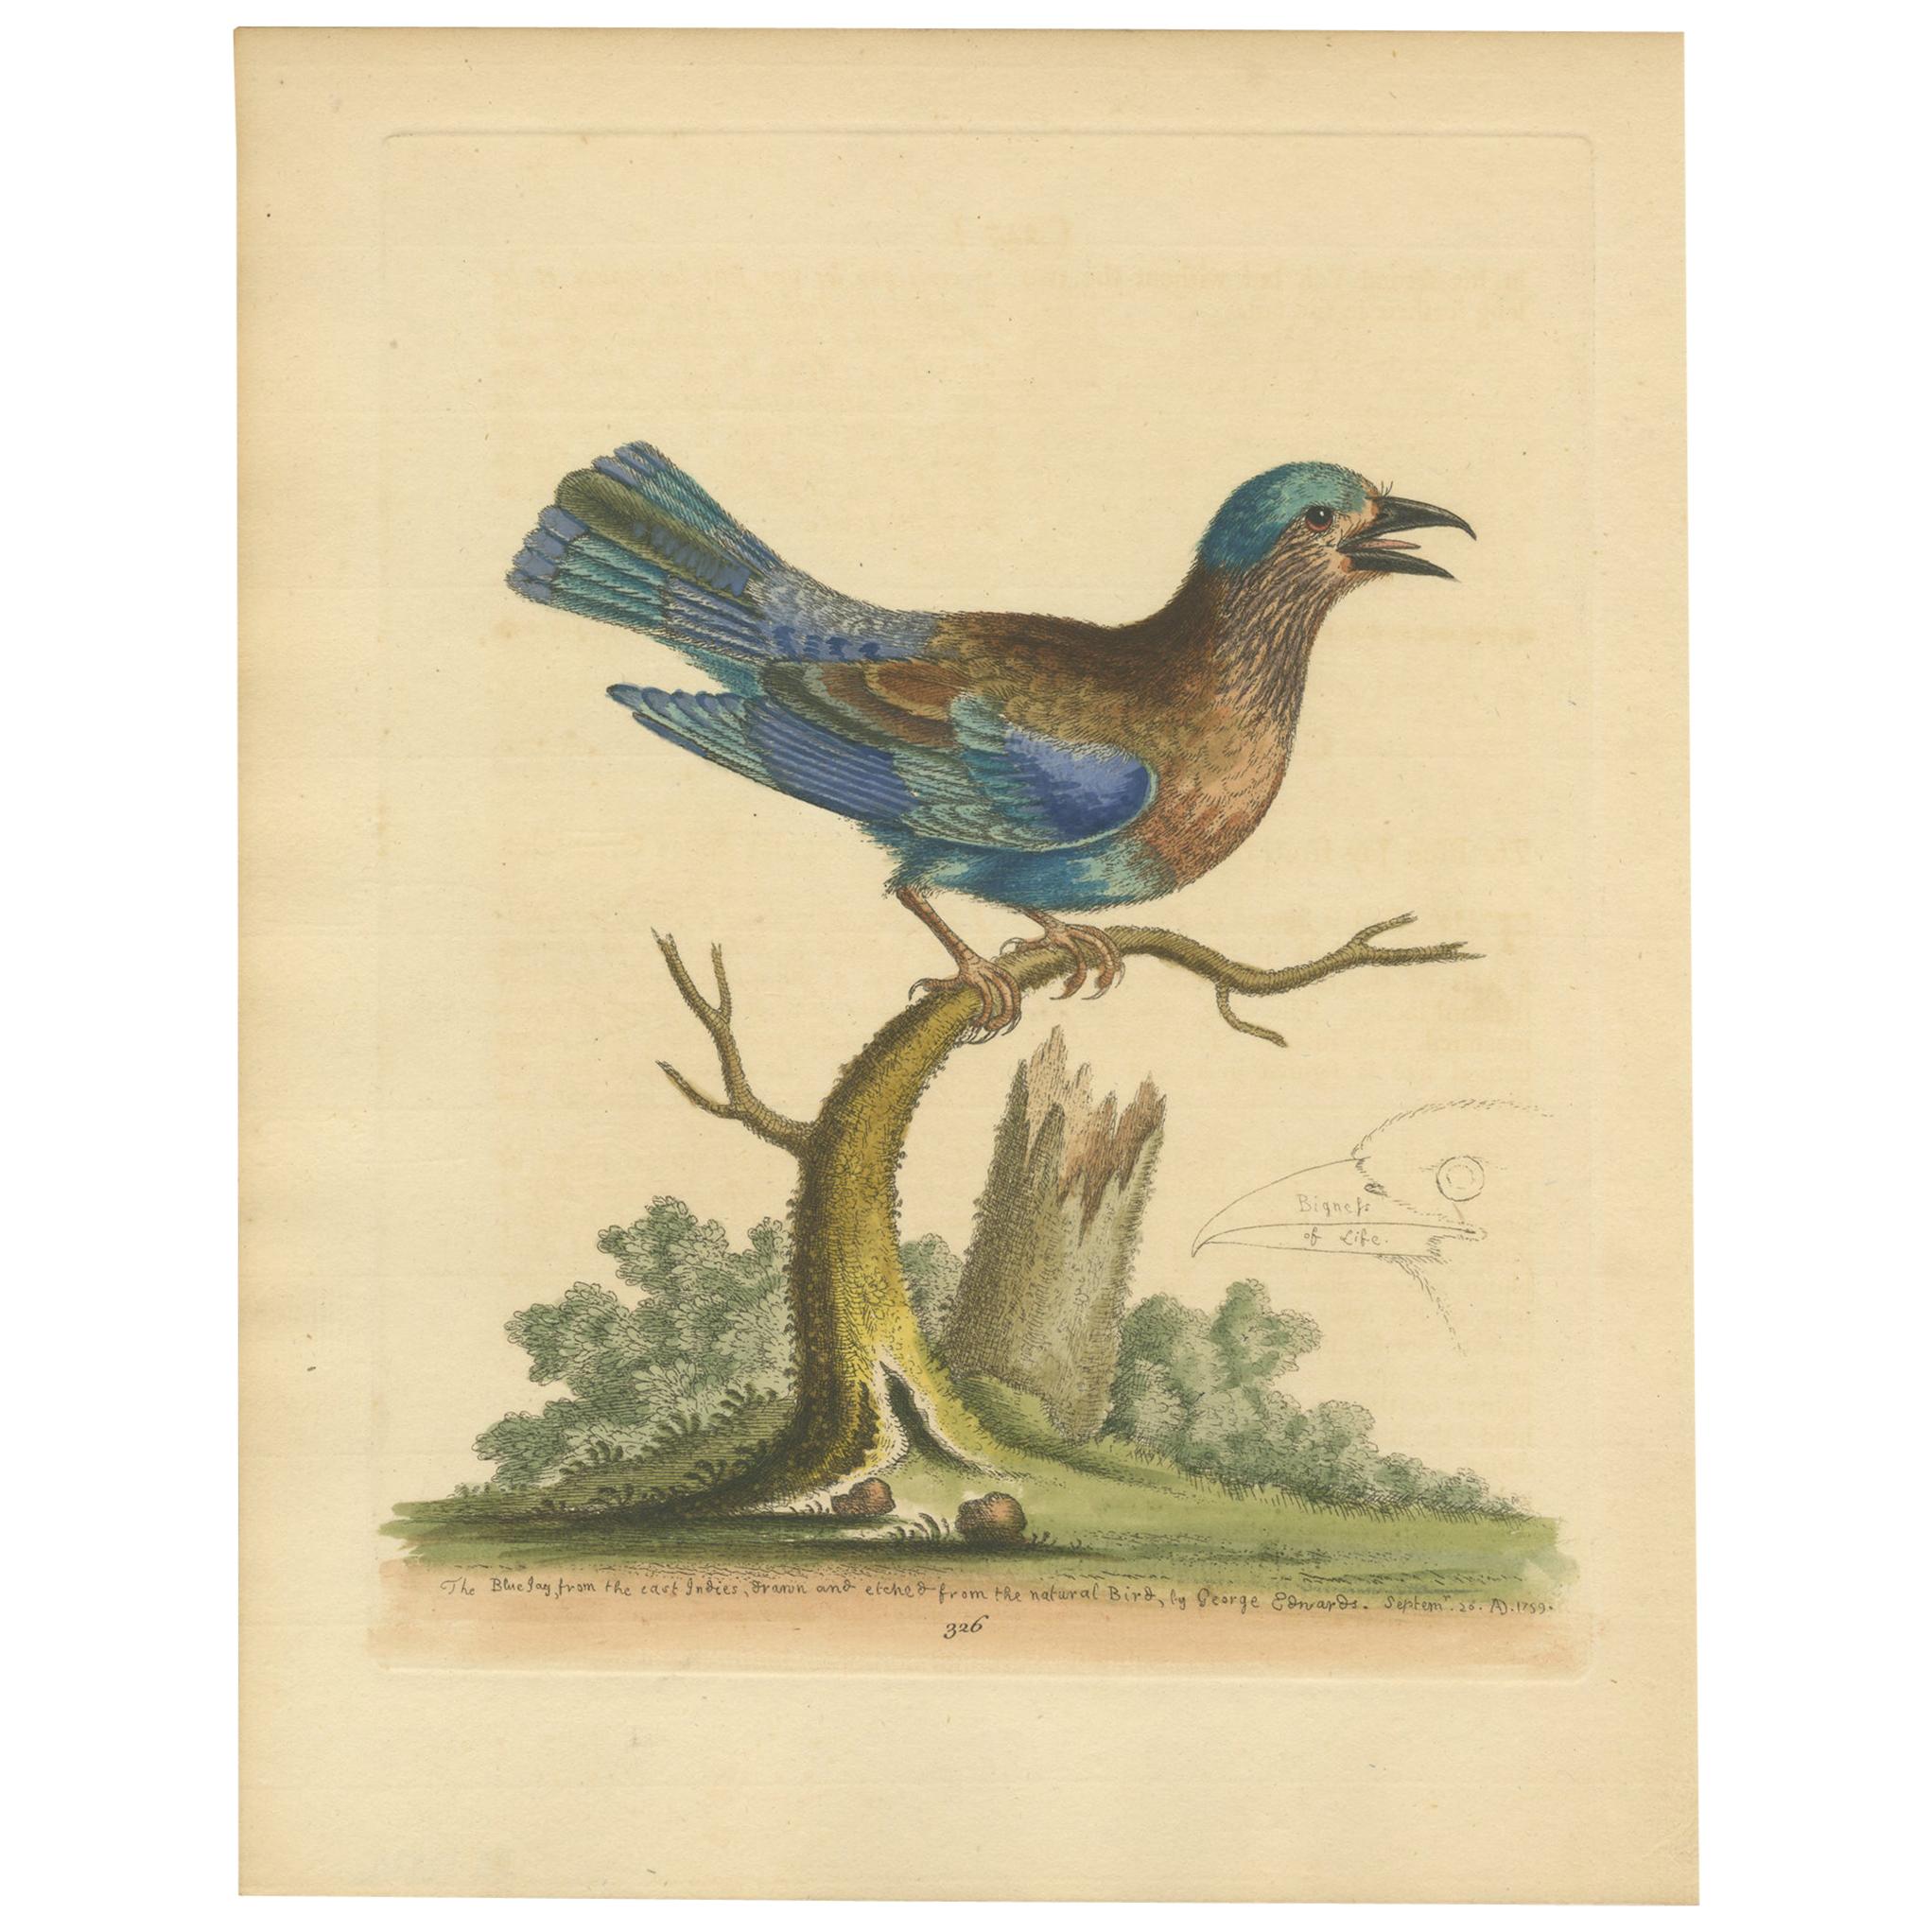 Antique Bird Print of the Blue Jay by Edwards, '1743'